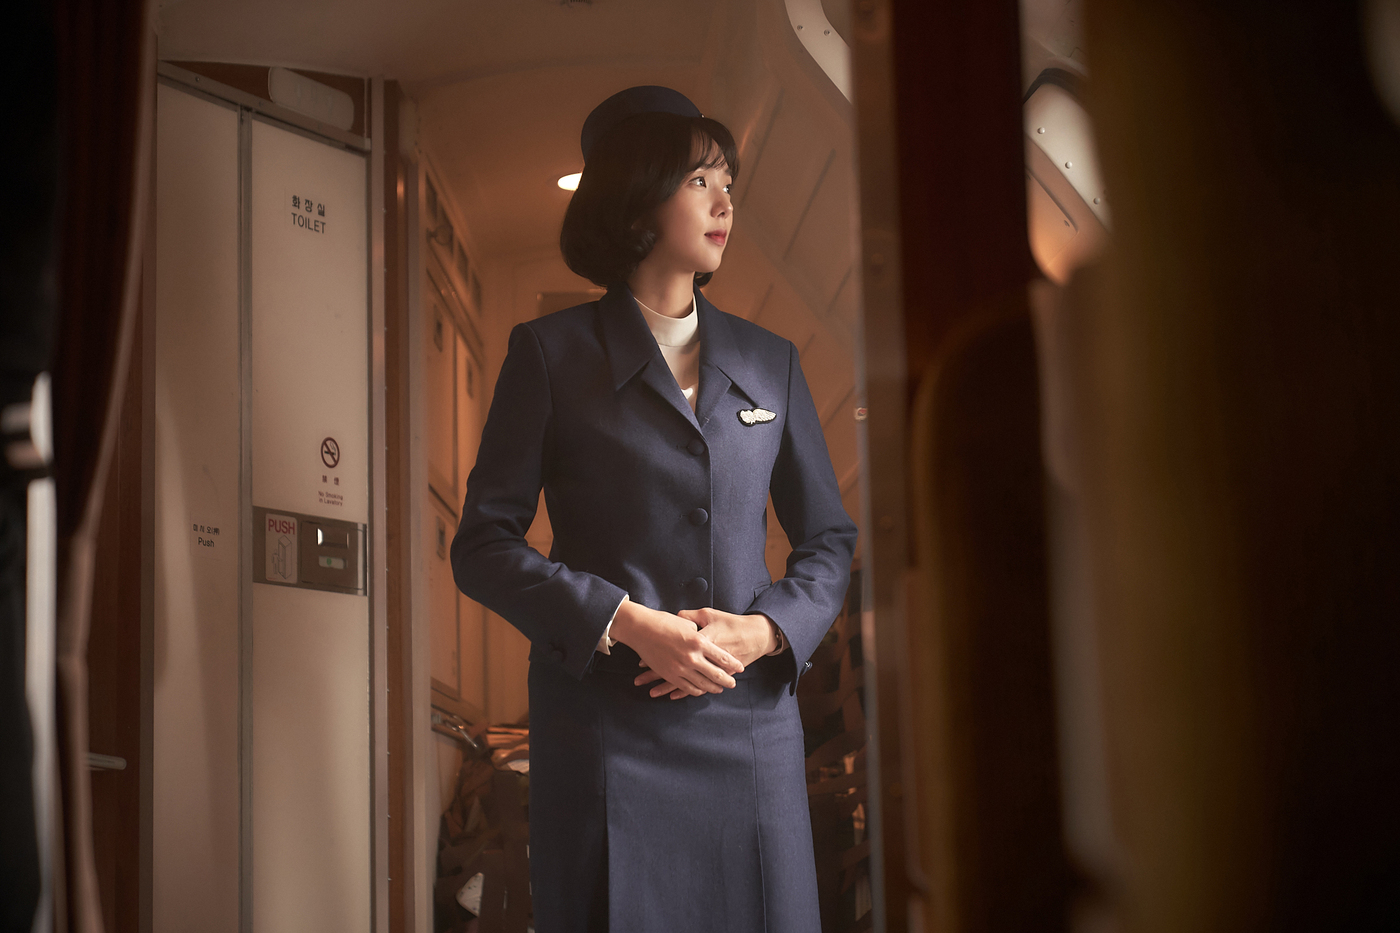 Chae Soo Bin Is A Flight Attendant Who Remains Determined Amidst A Crisis In New Thriller Film